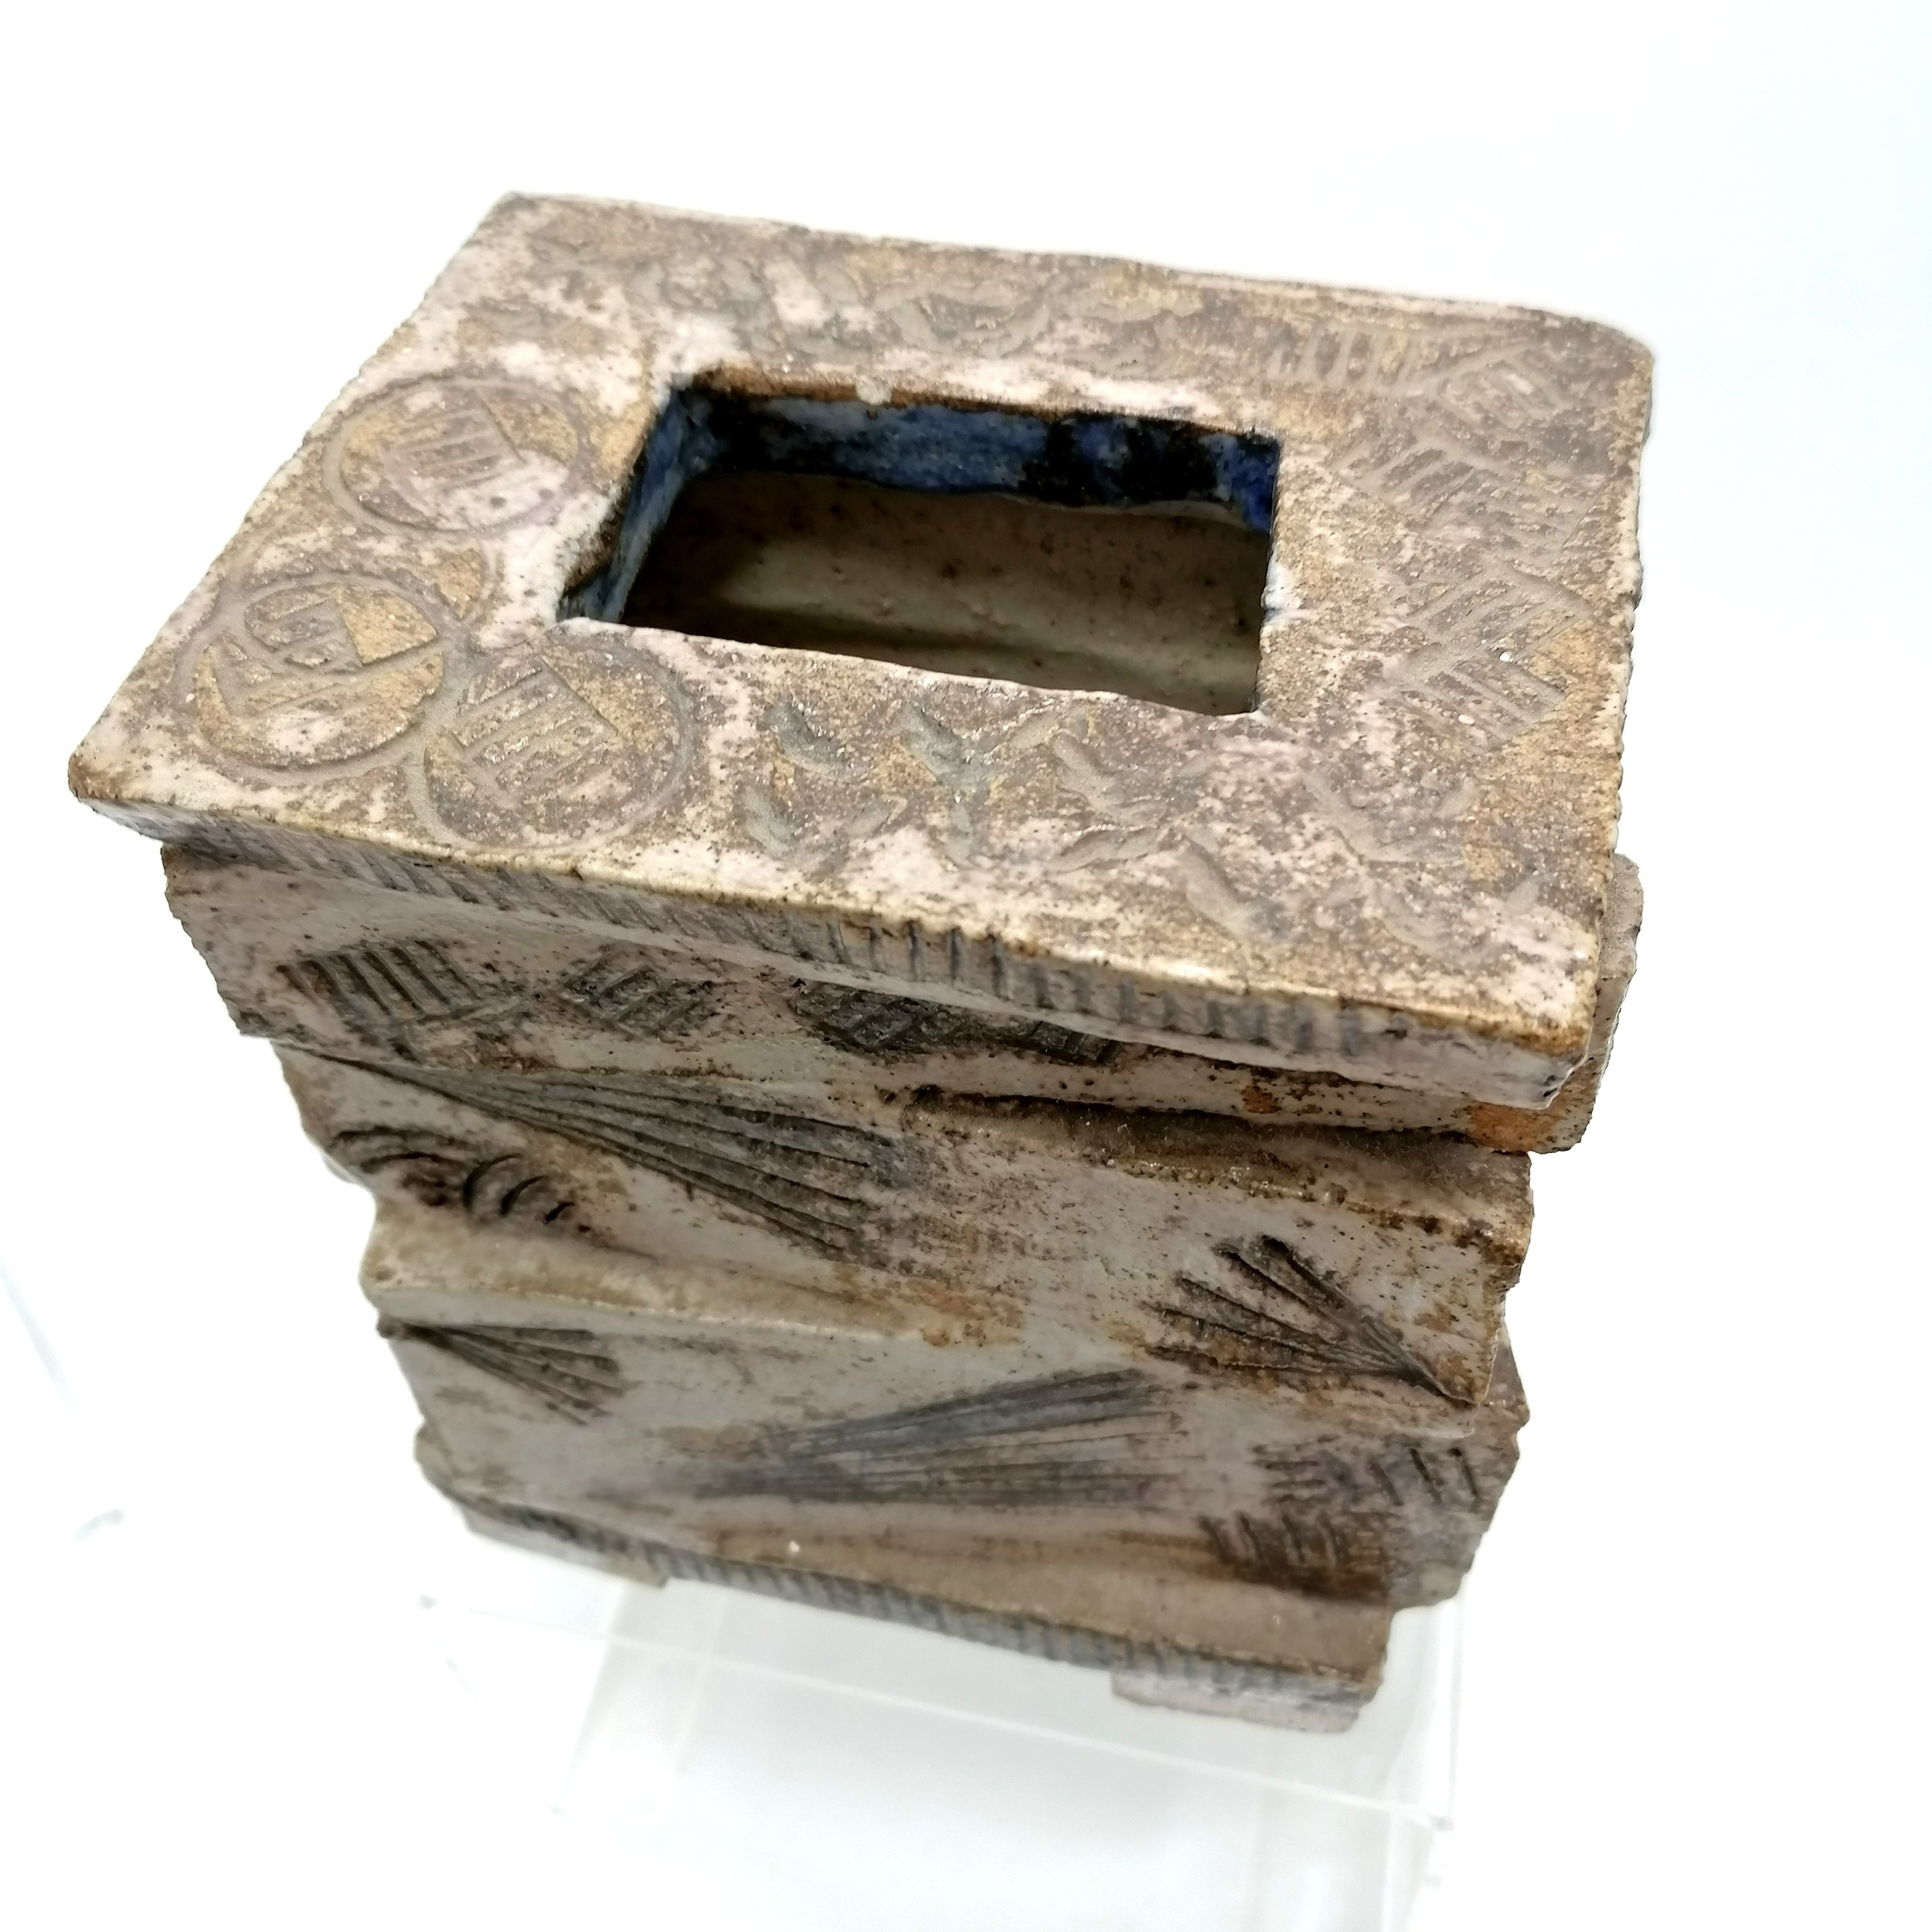 Studio pottery brick style vase, signed CH 248, slight surface chips - 16cm high x 13cm wide x 9cm - Image 2 of 9